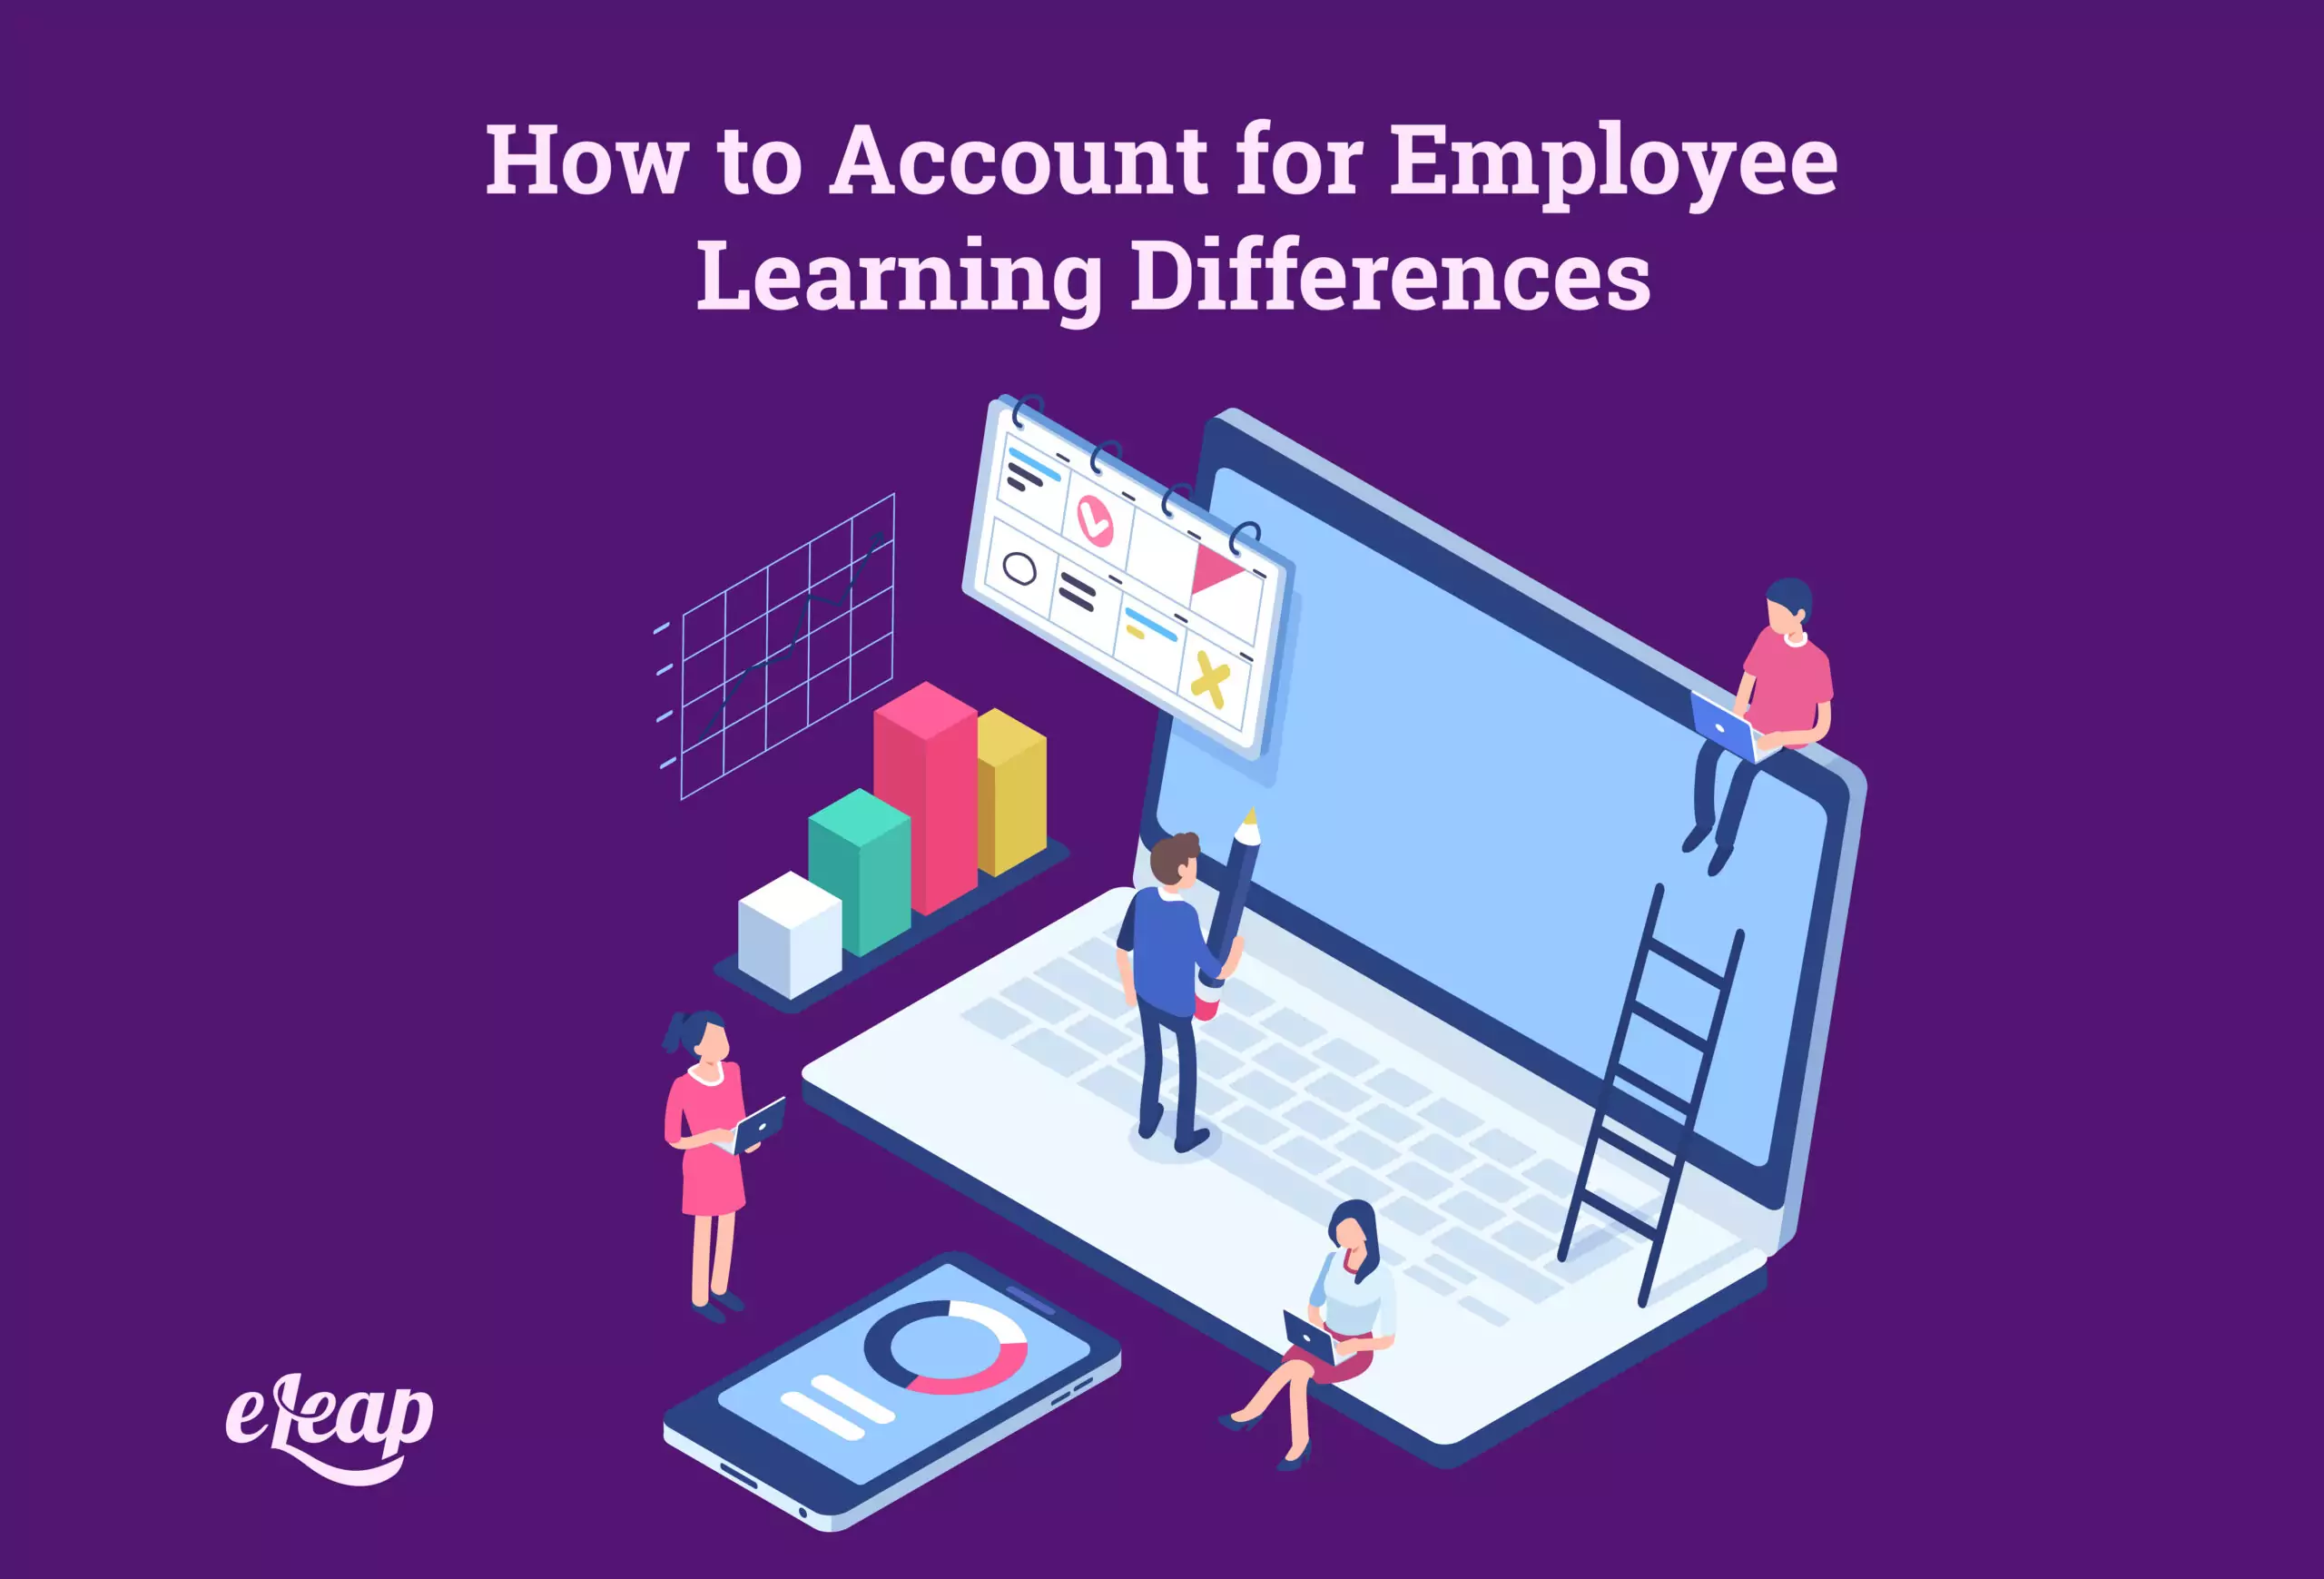 How to Account for Employee Learning Differences